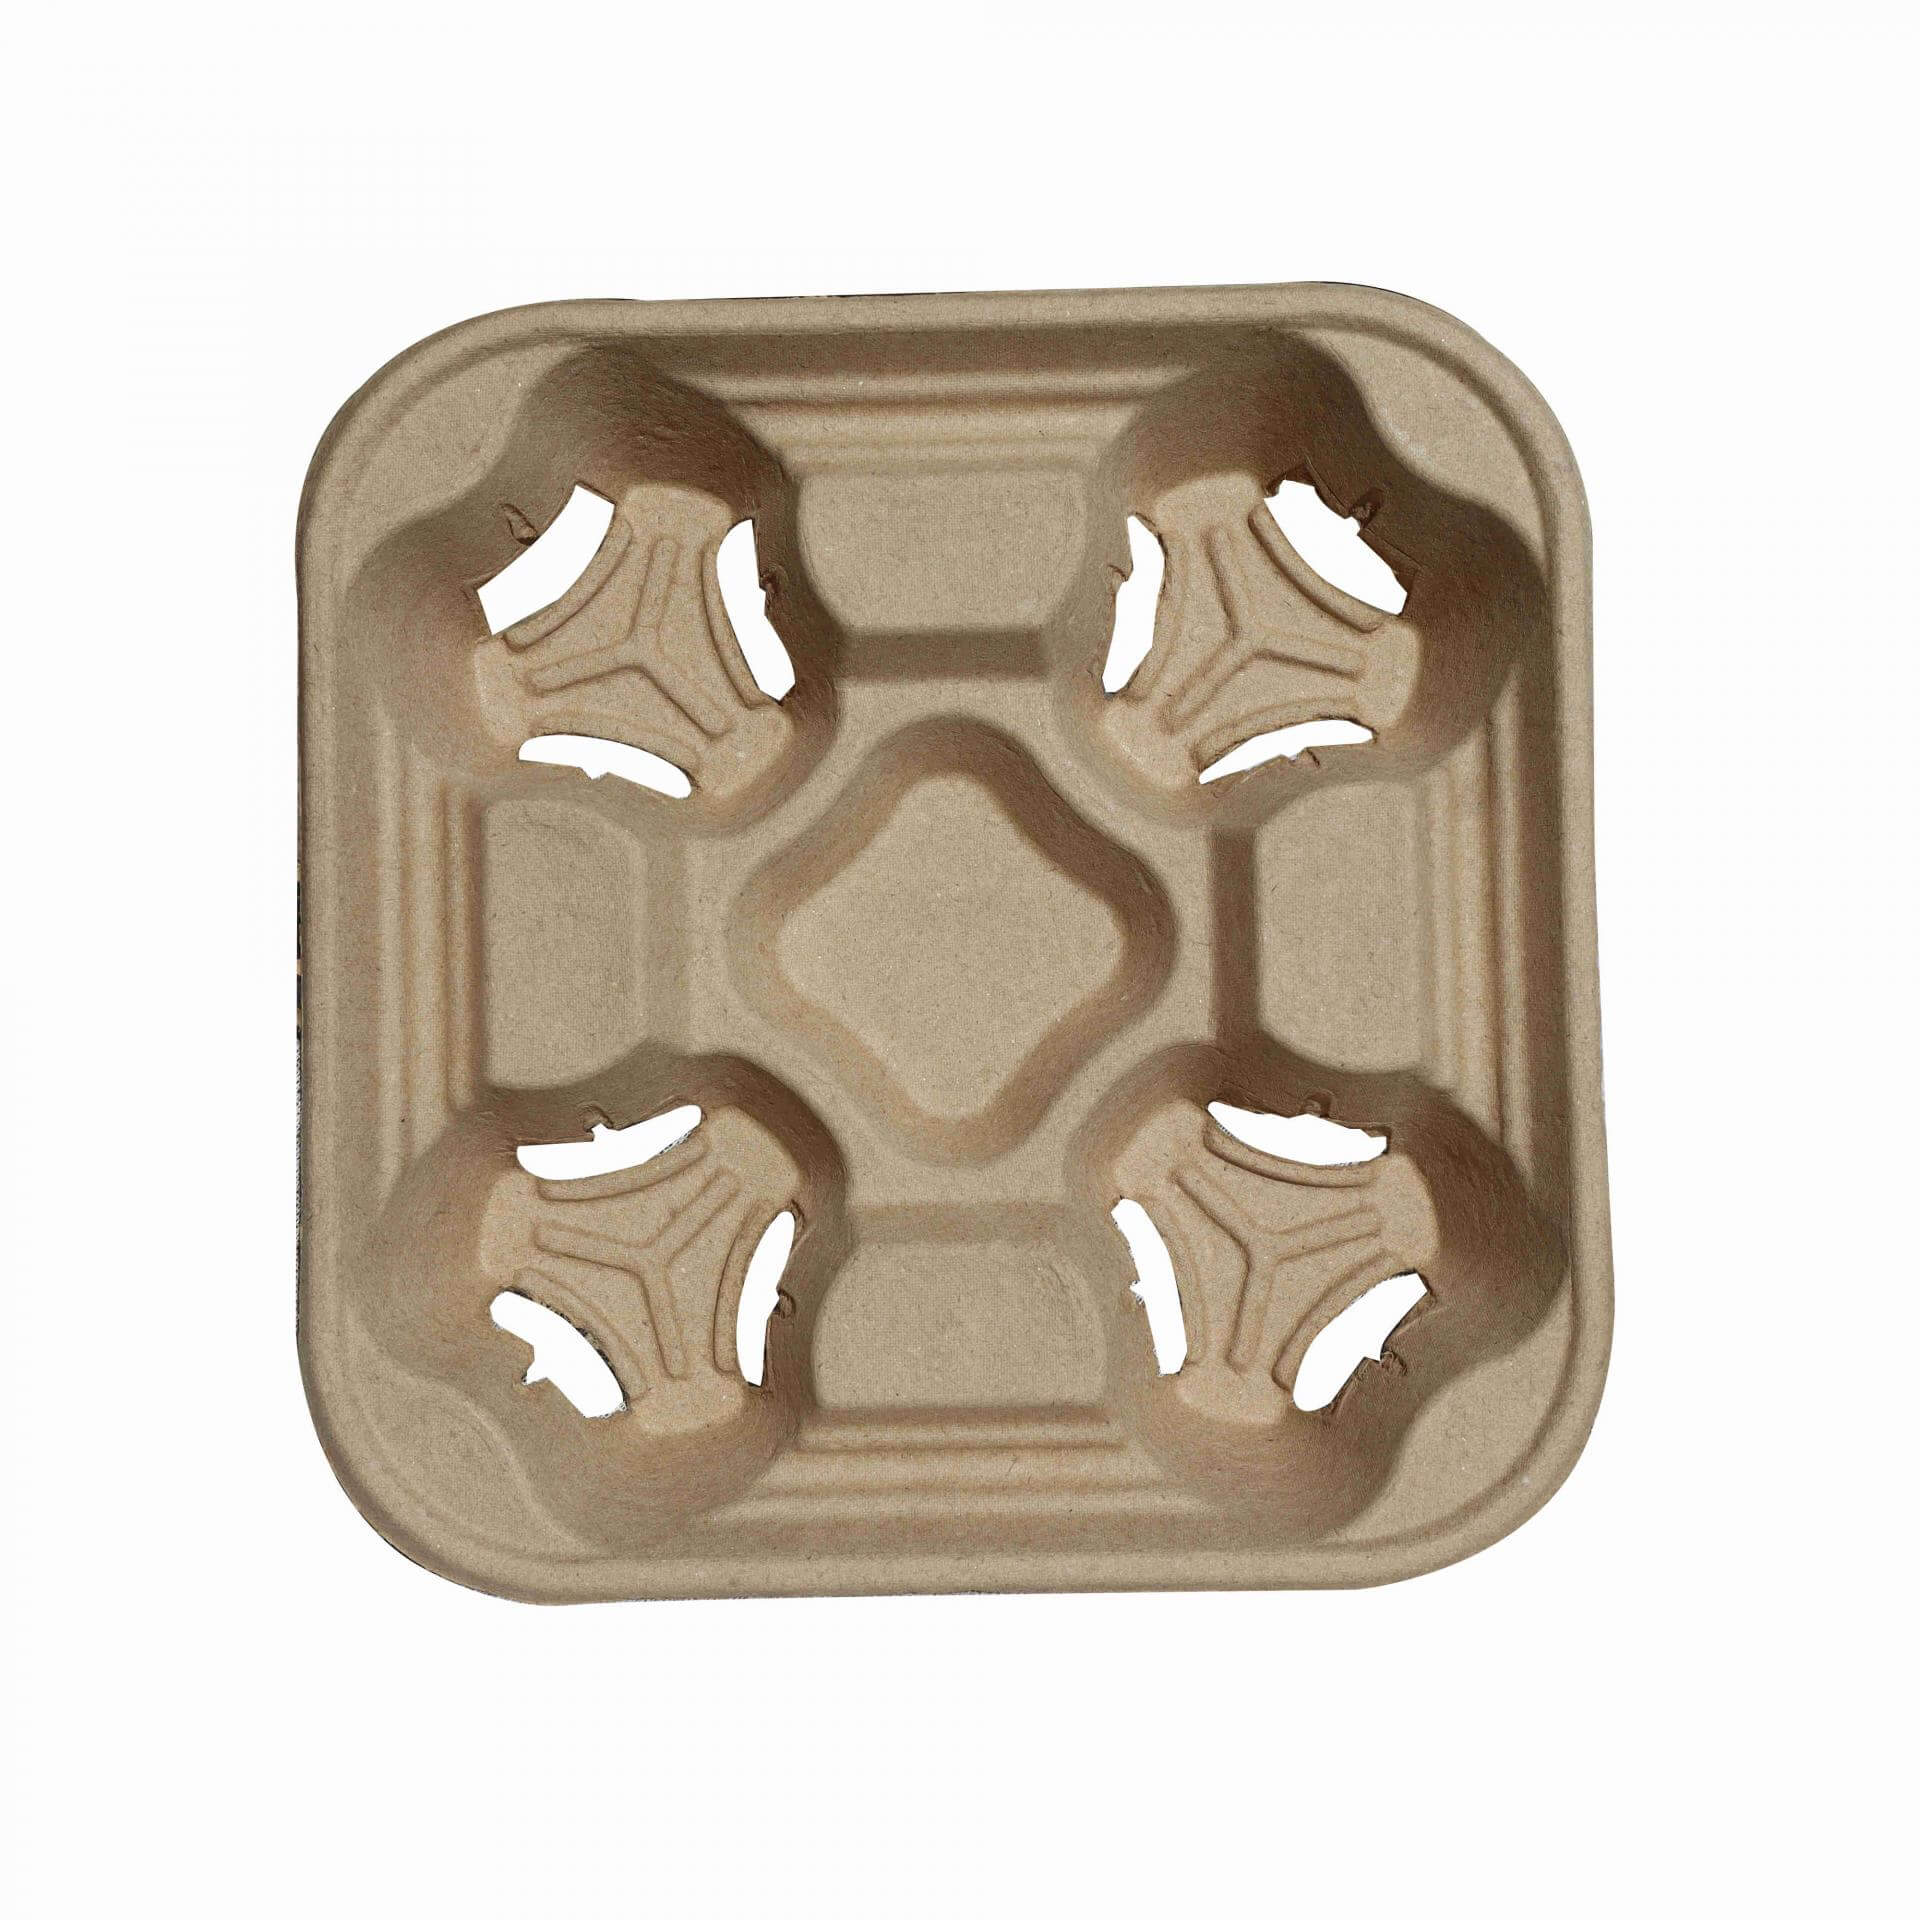 Corrugated pulp disposable 4 cup holder tray takeaway carrier 